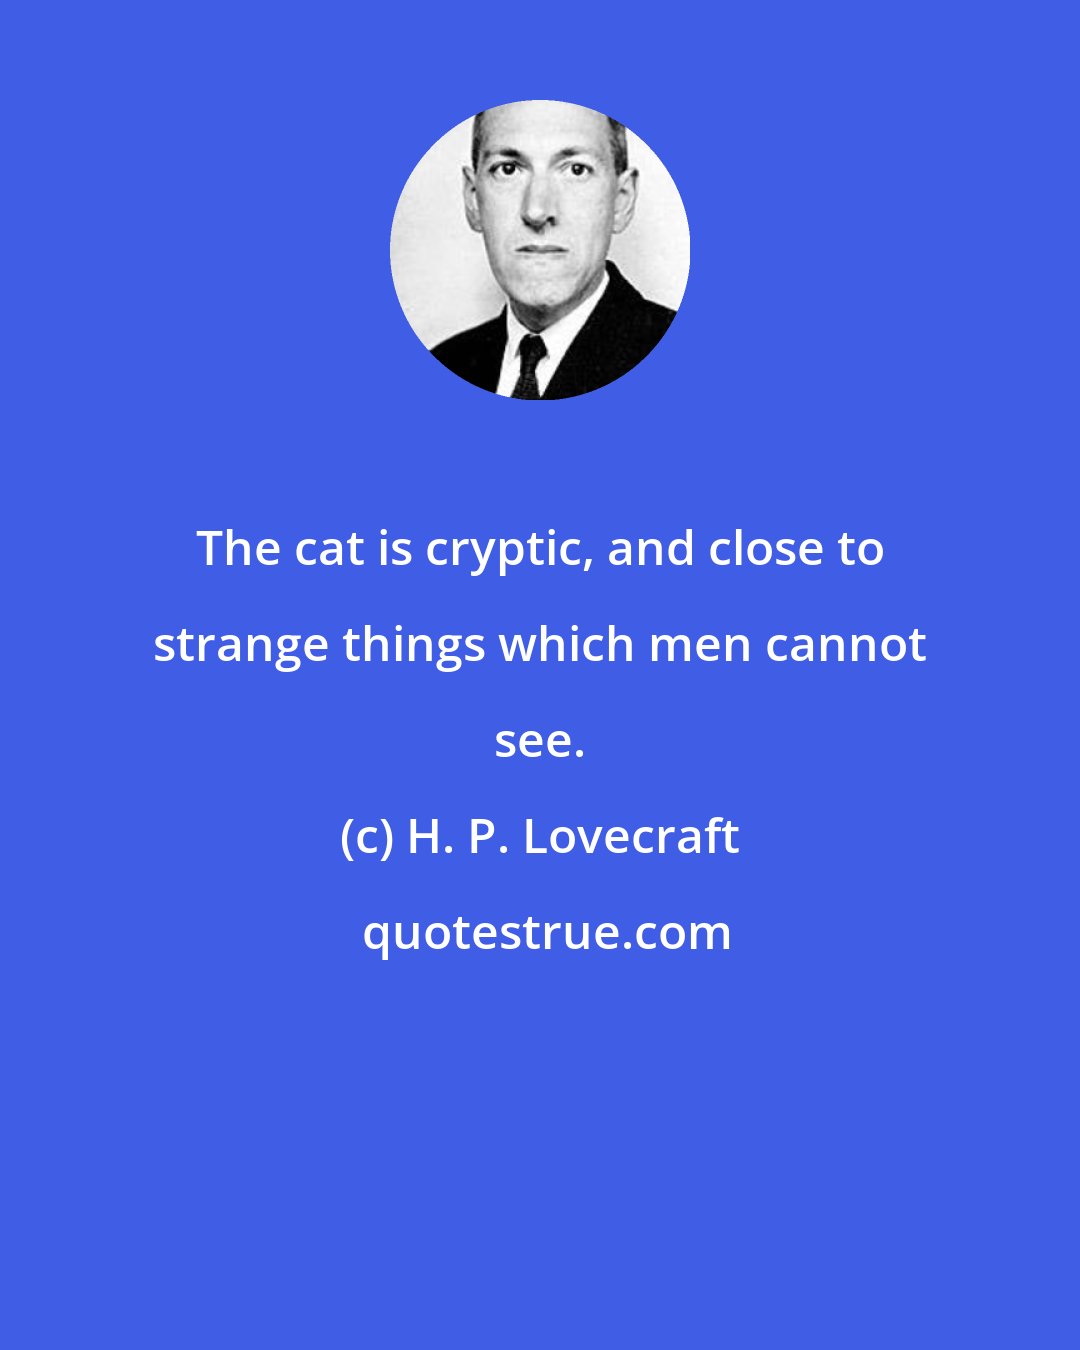 H. P. Lovecraft: The cat is cryptic, and close to strange things which men cannot see.